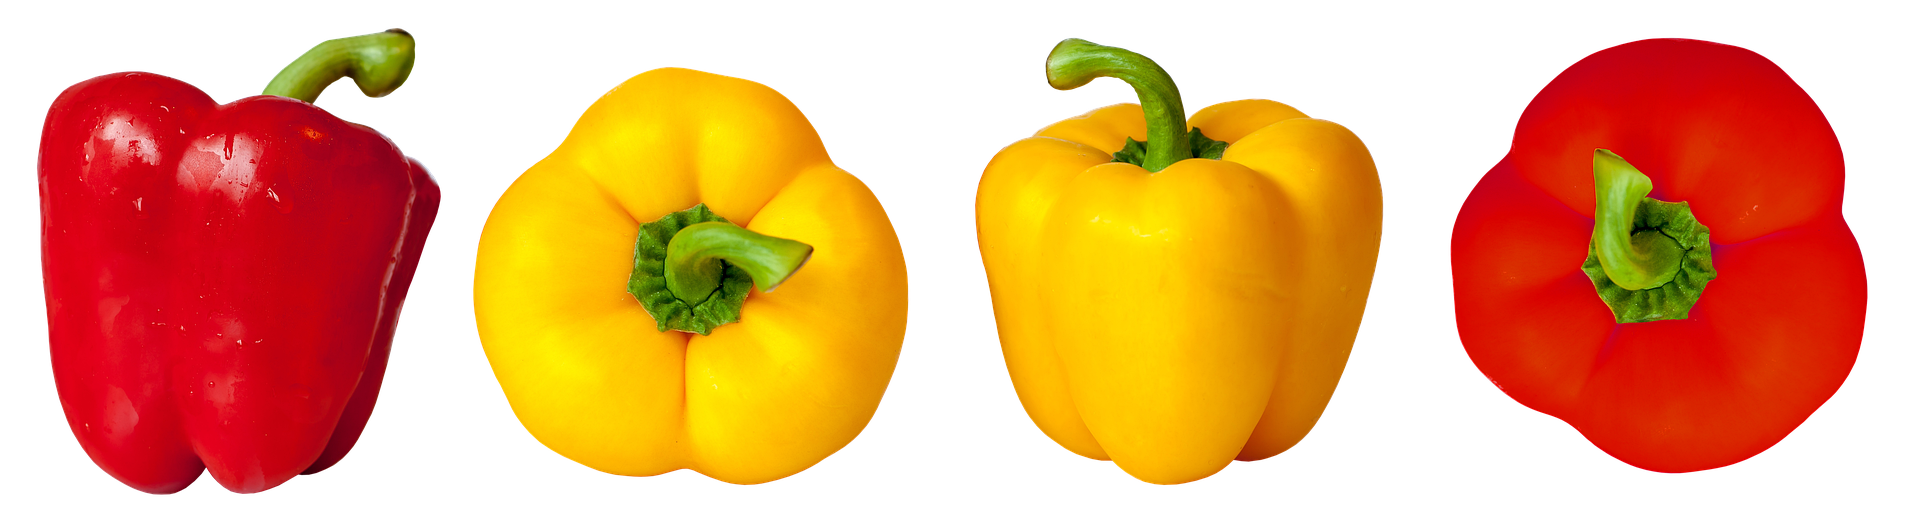 A Yellow Bell Pepper With Green Stems